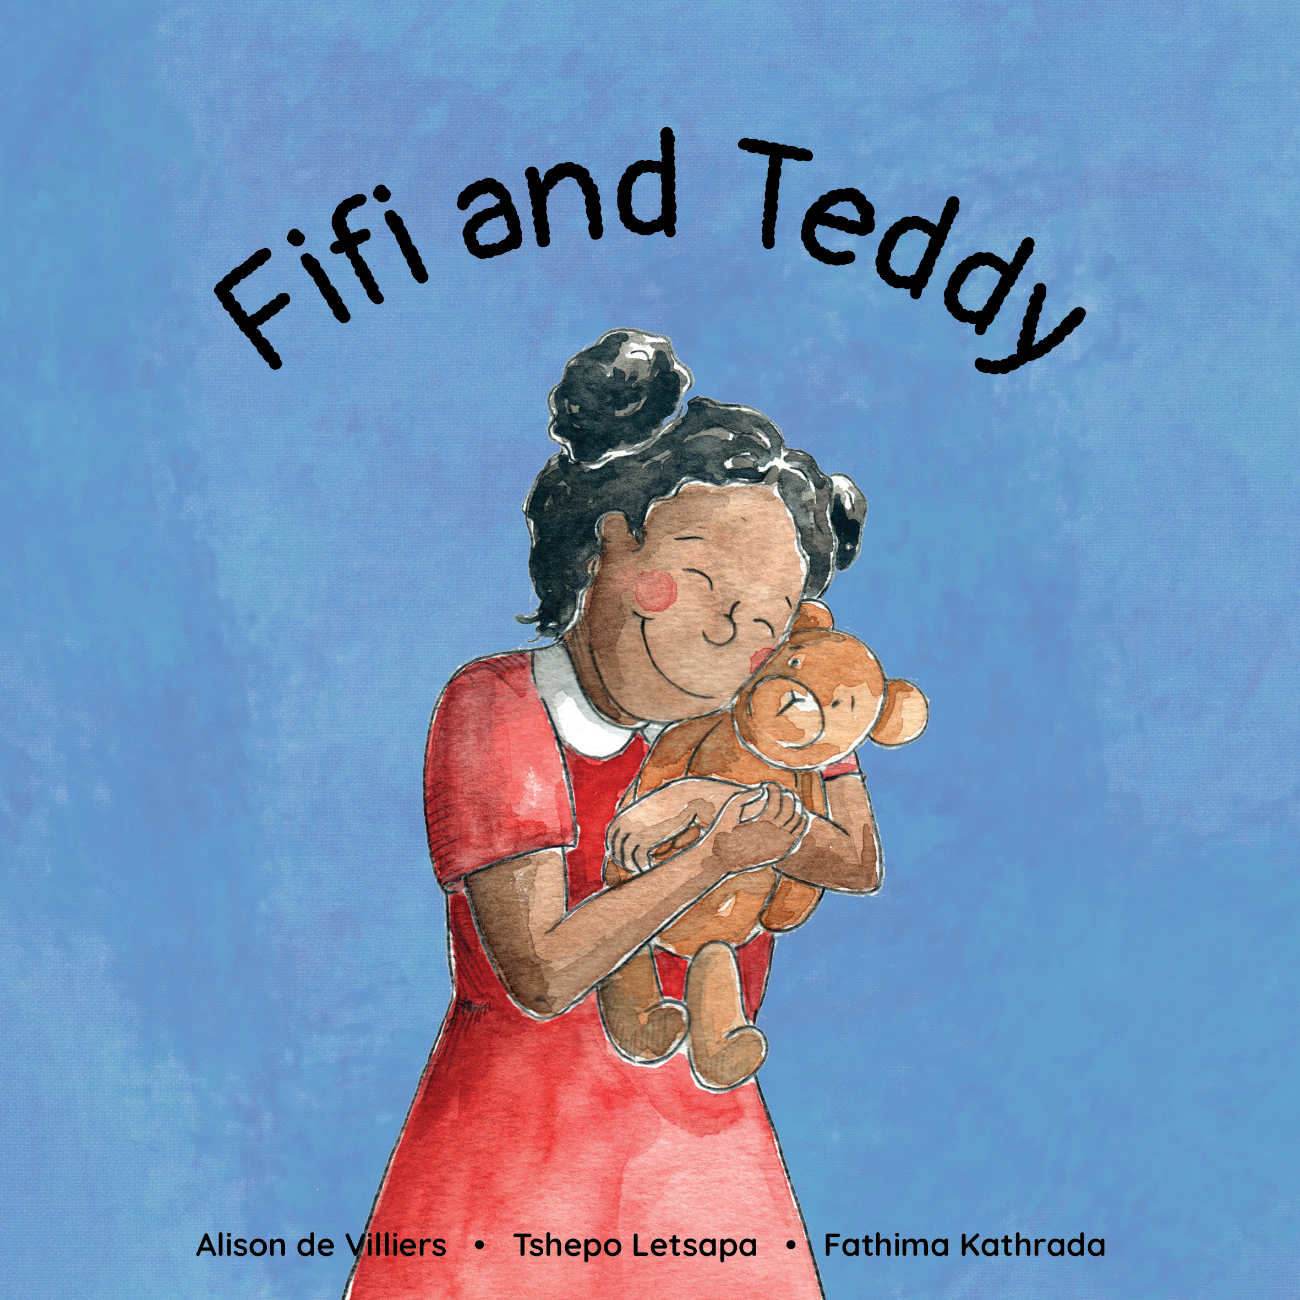 Bedtime Stories Fifi and Teddy short stories for kids cover